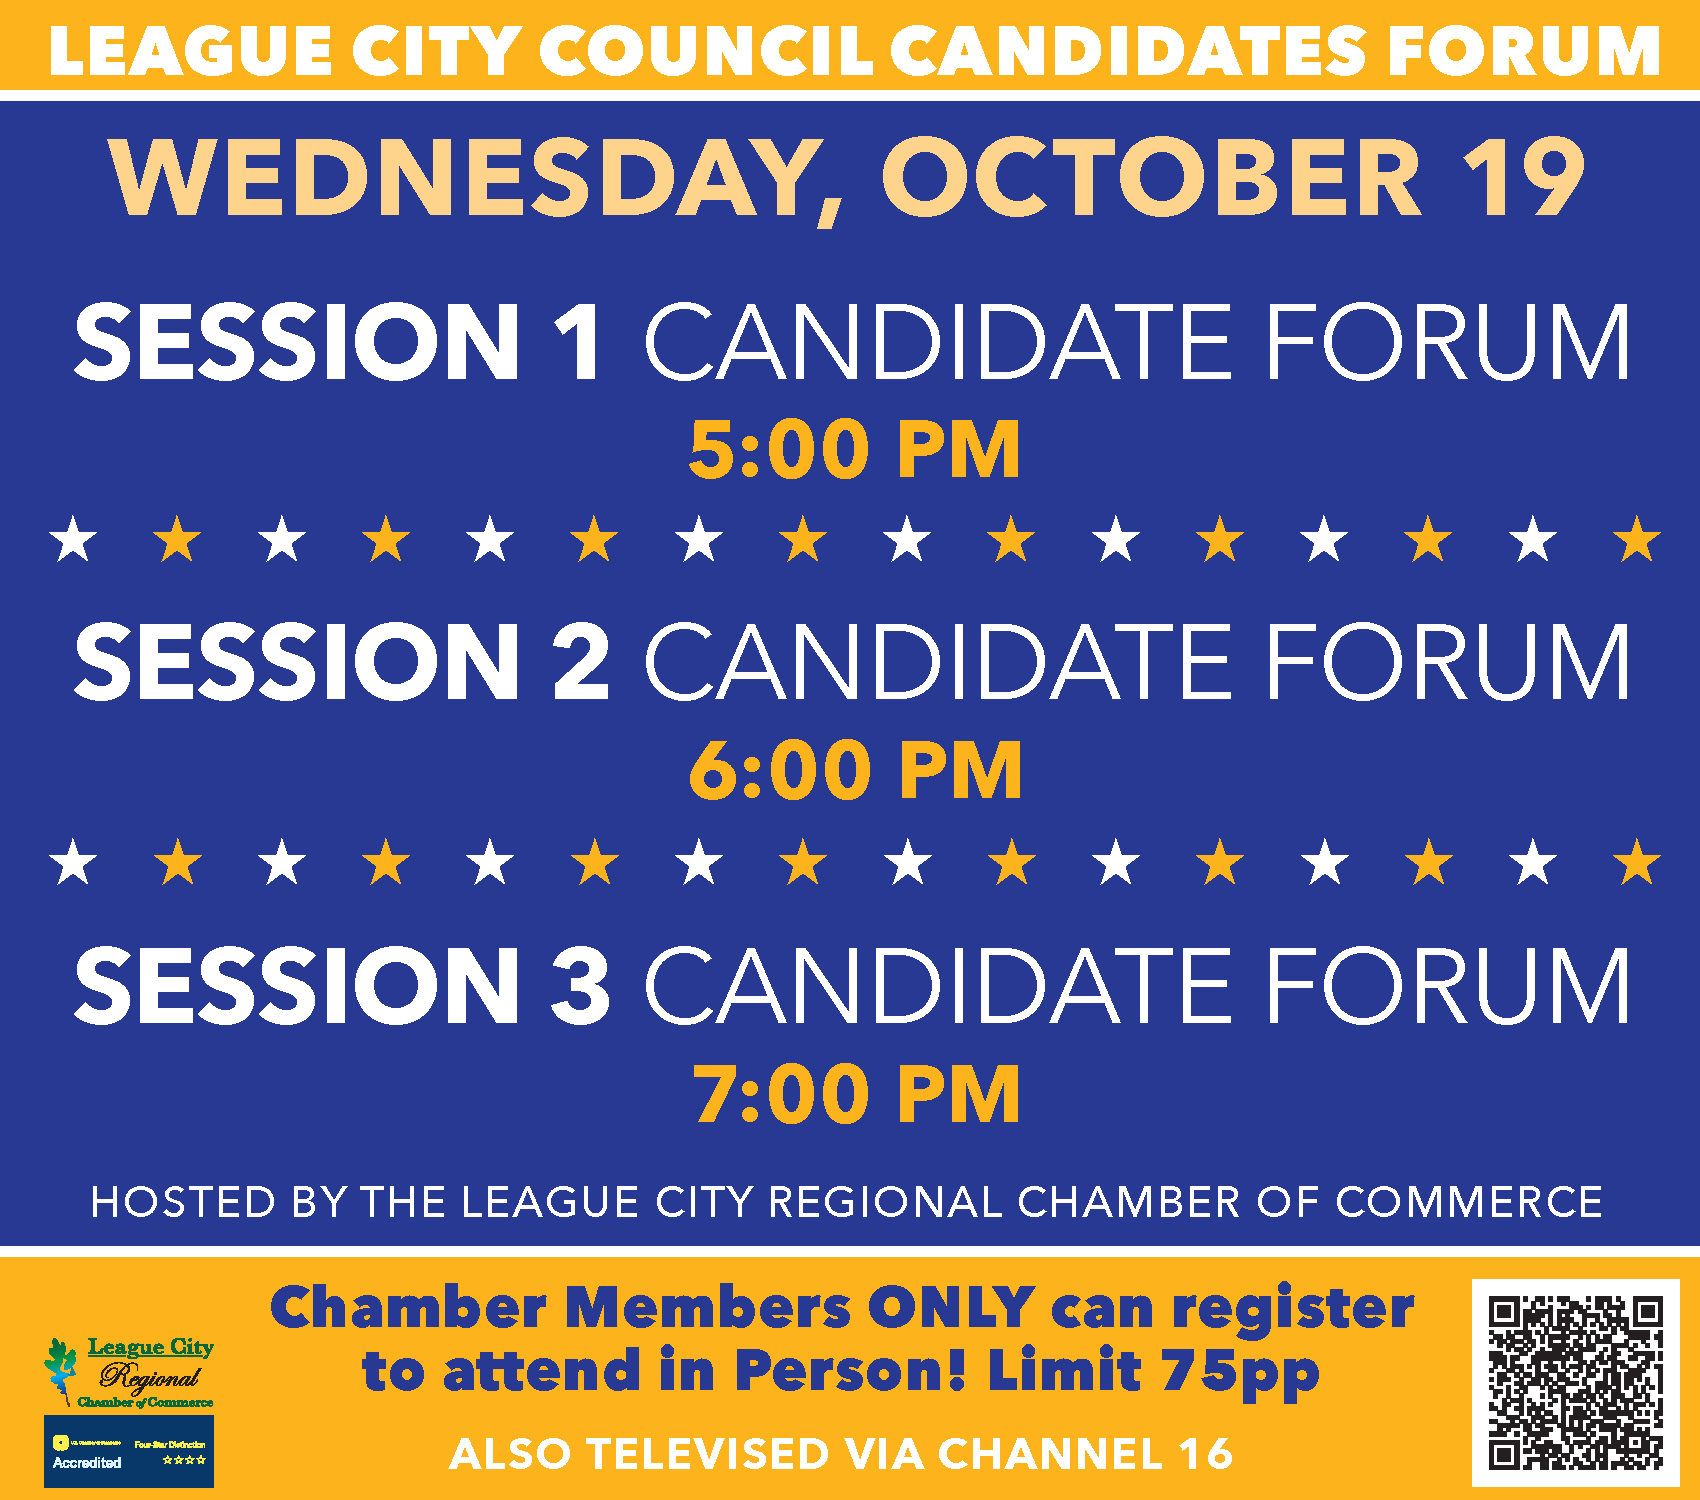 See your potential leaders speak at the chamber candidate forum!